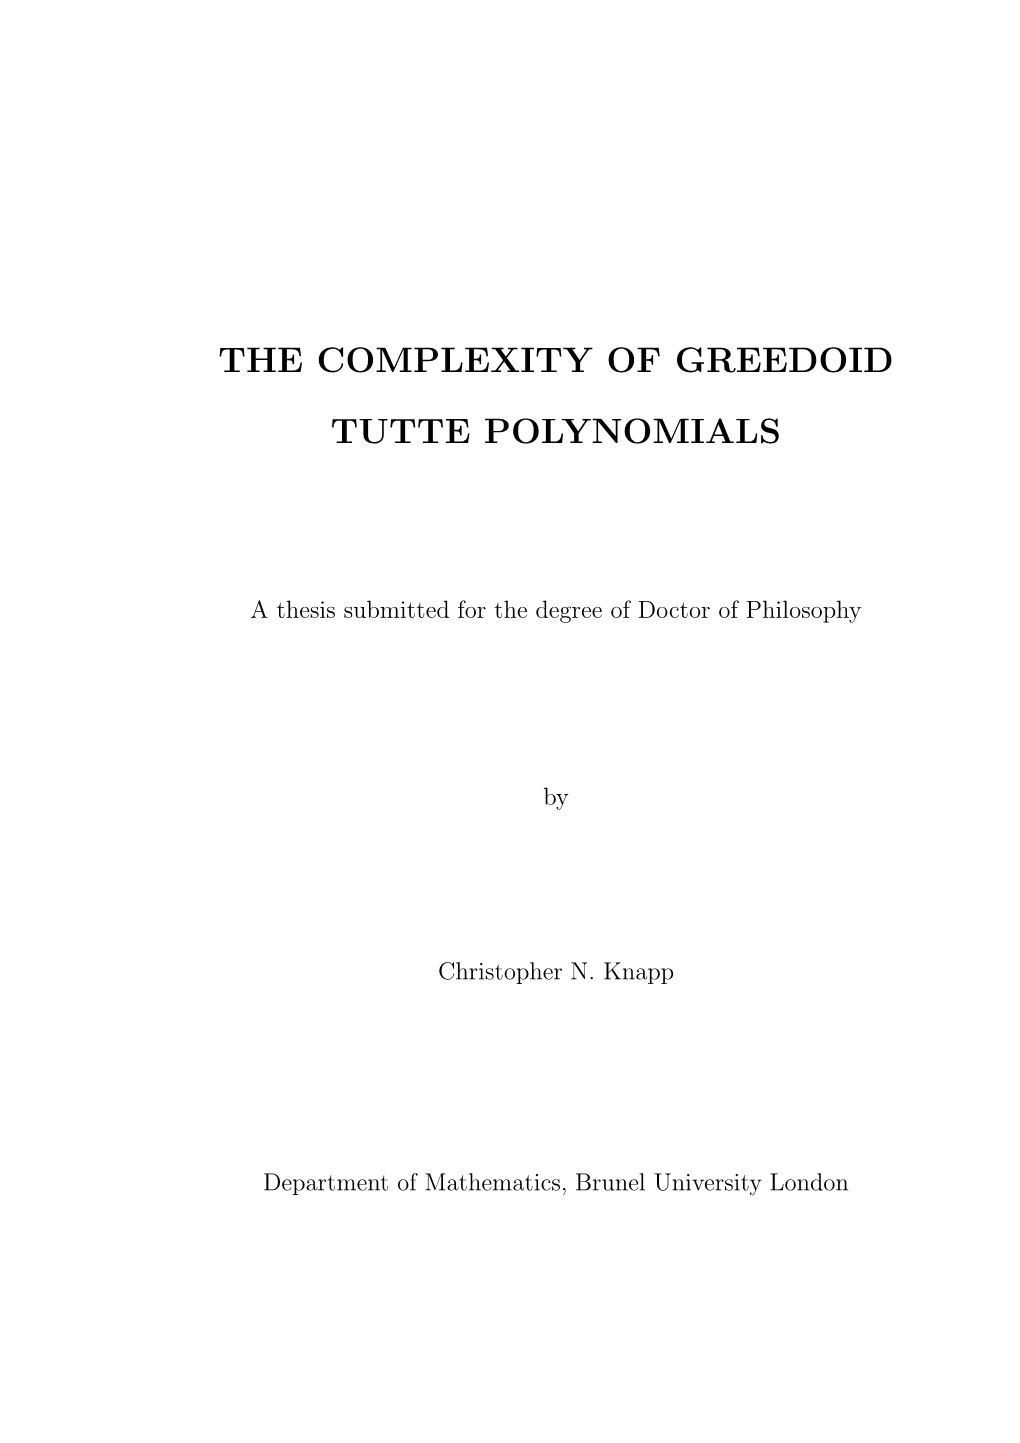 The Complexity of Greedoid Tutte Polynomials